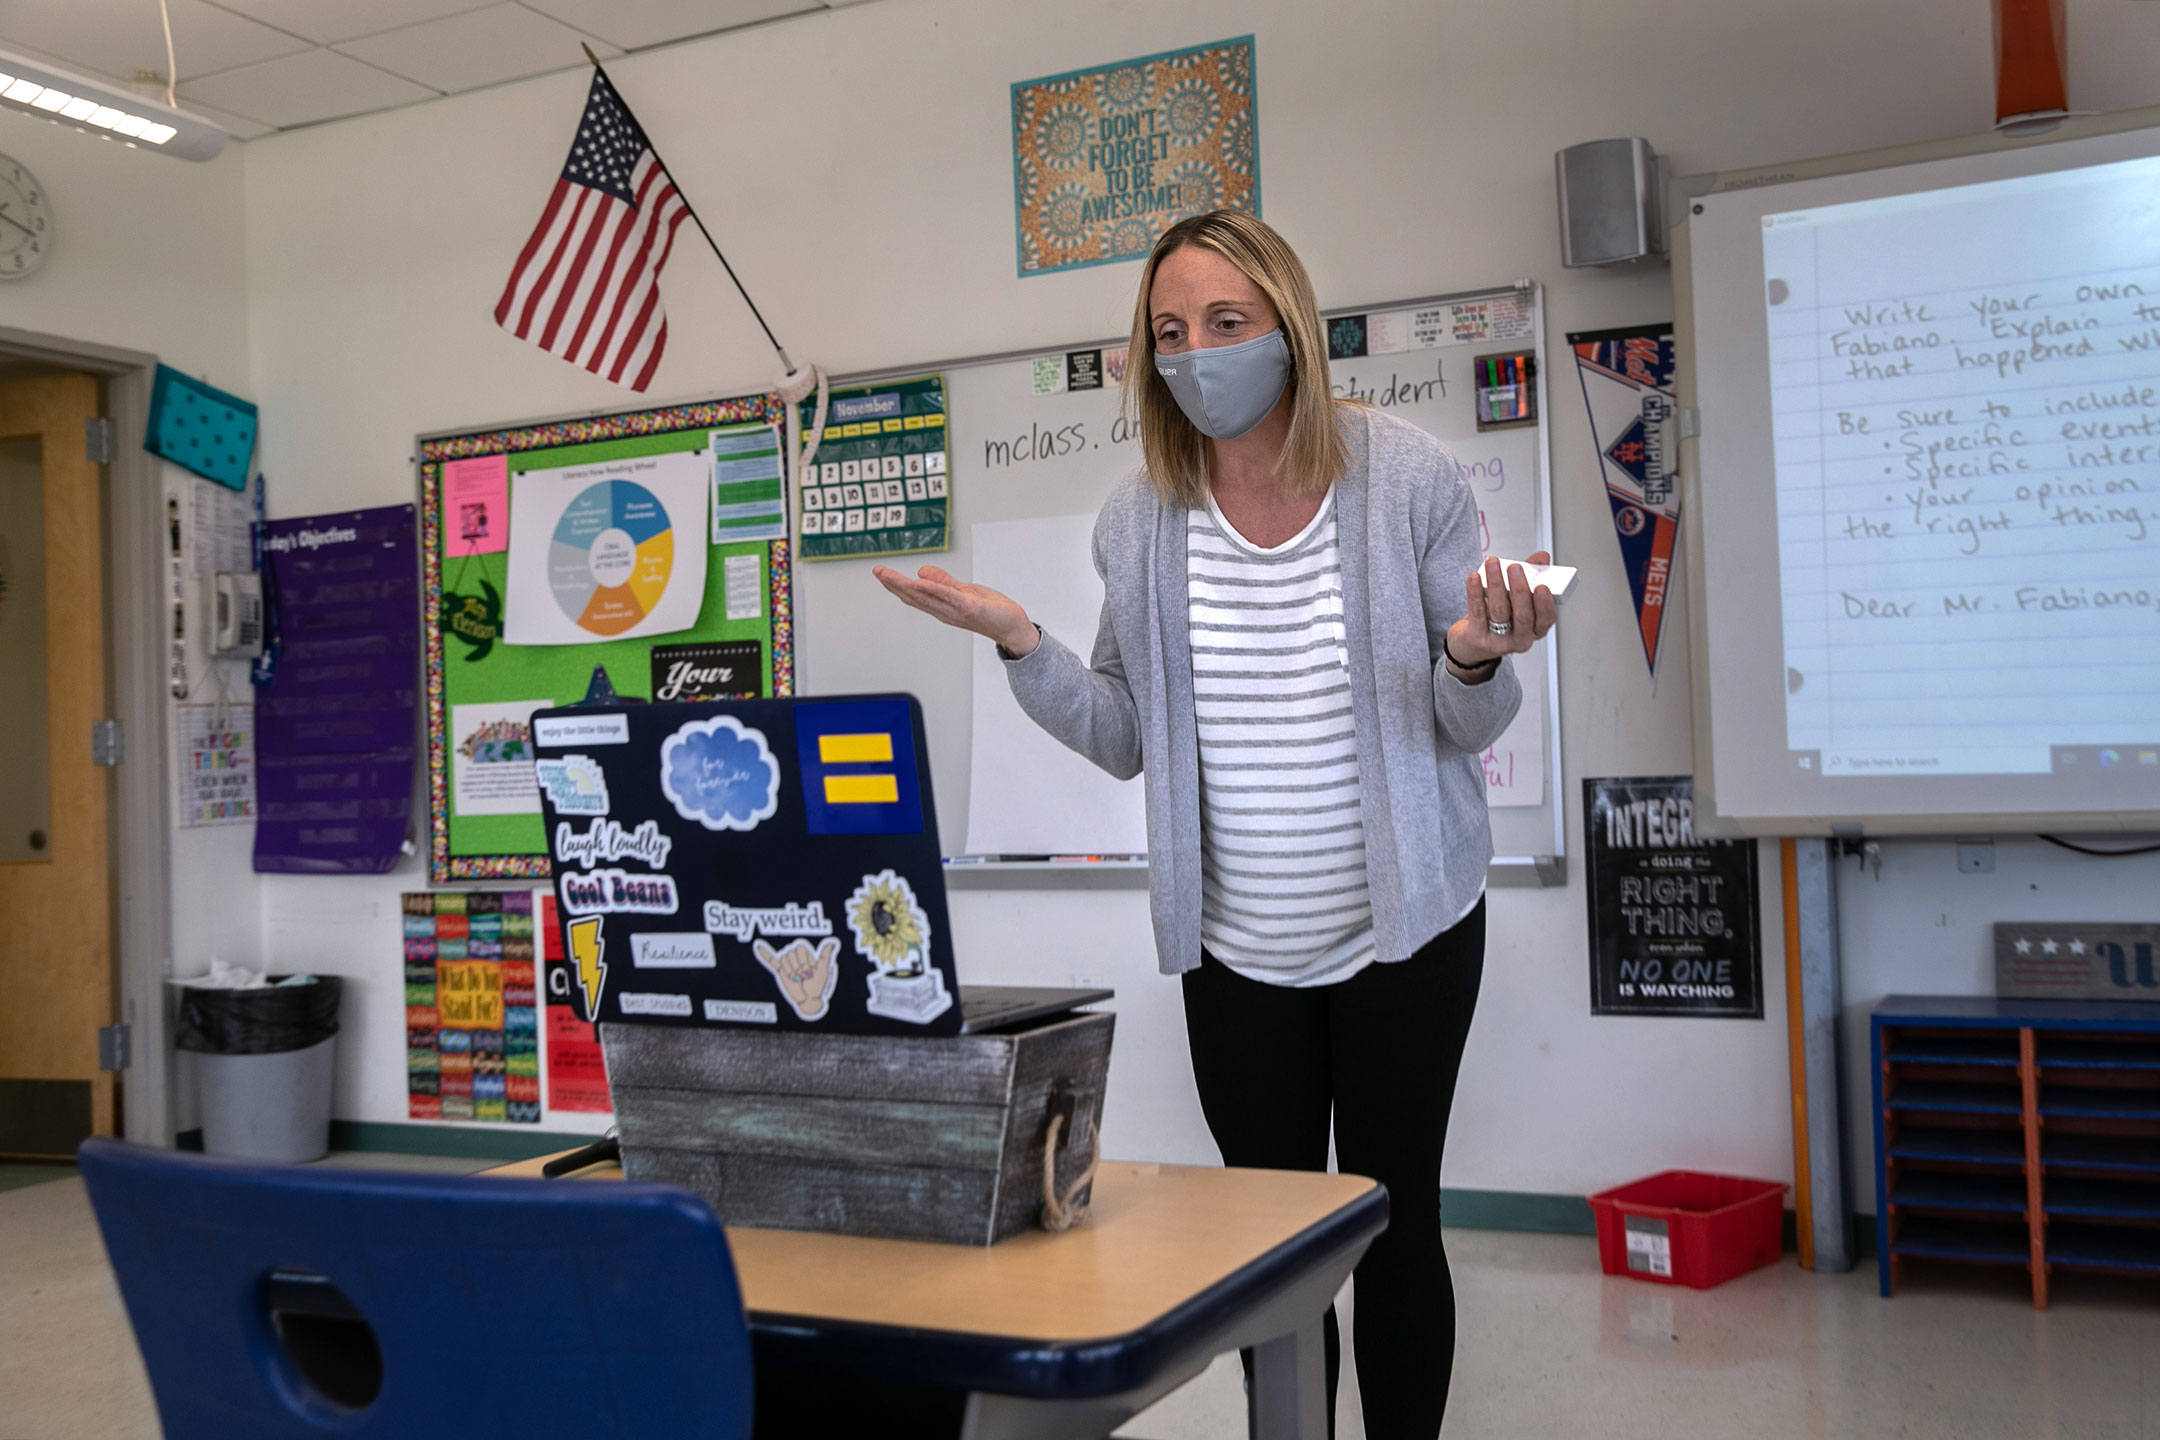 White teacher wearing a mask stands in front of her laptop and speaks to her remote class